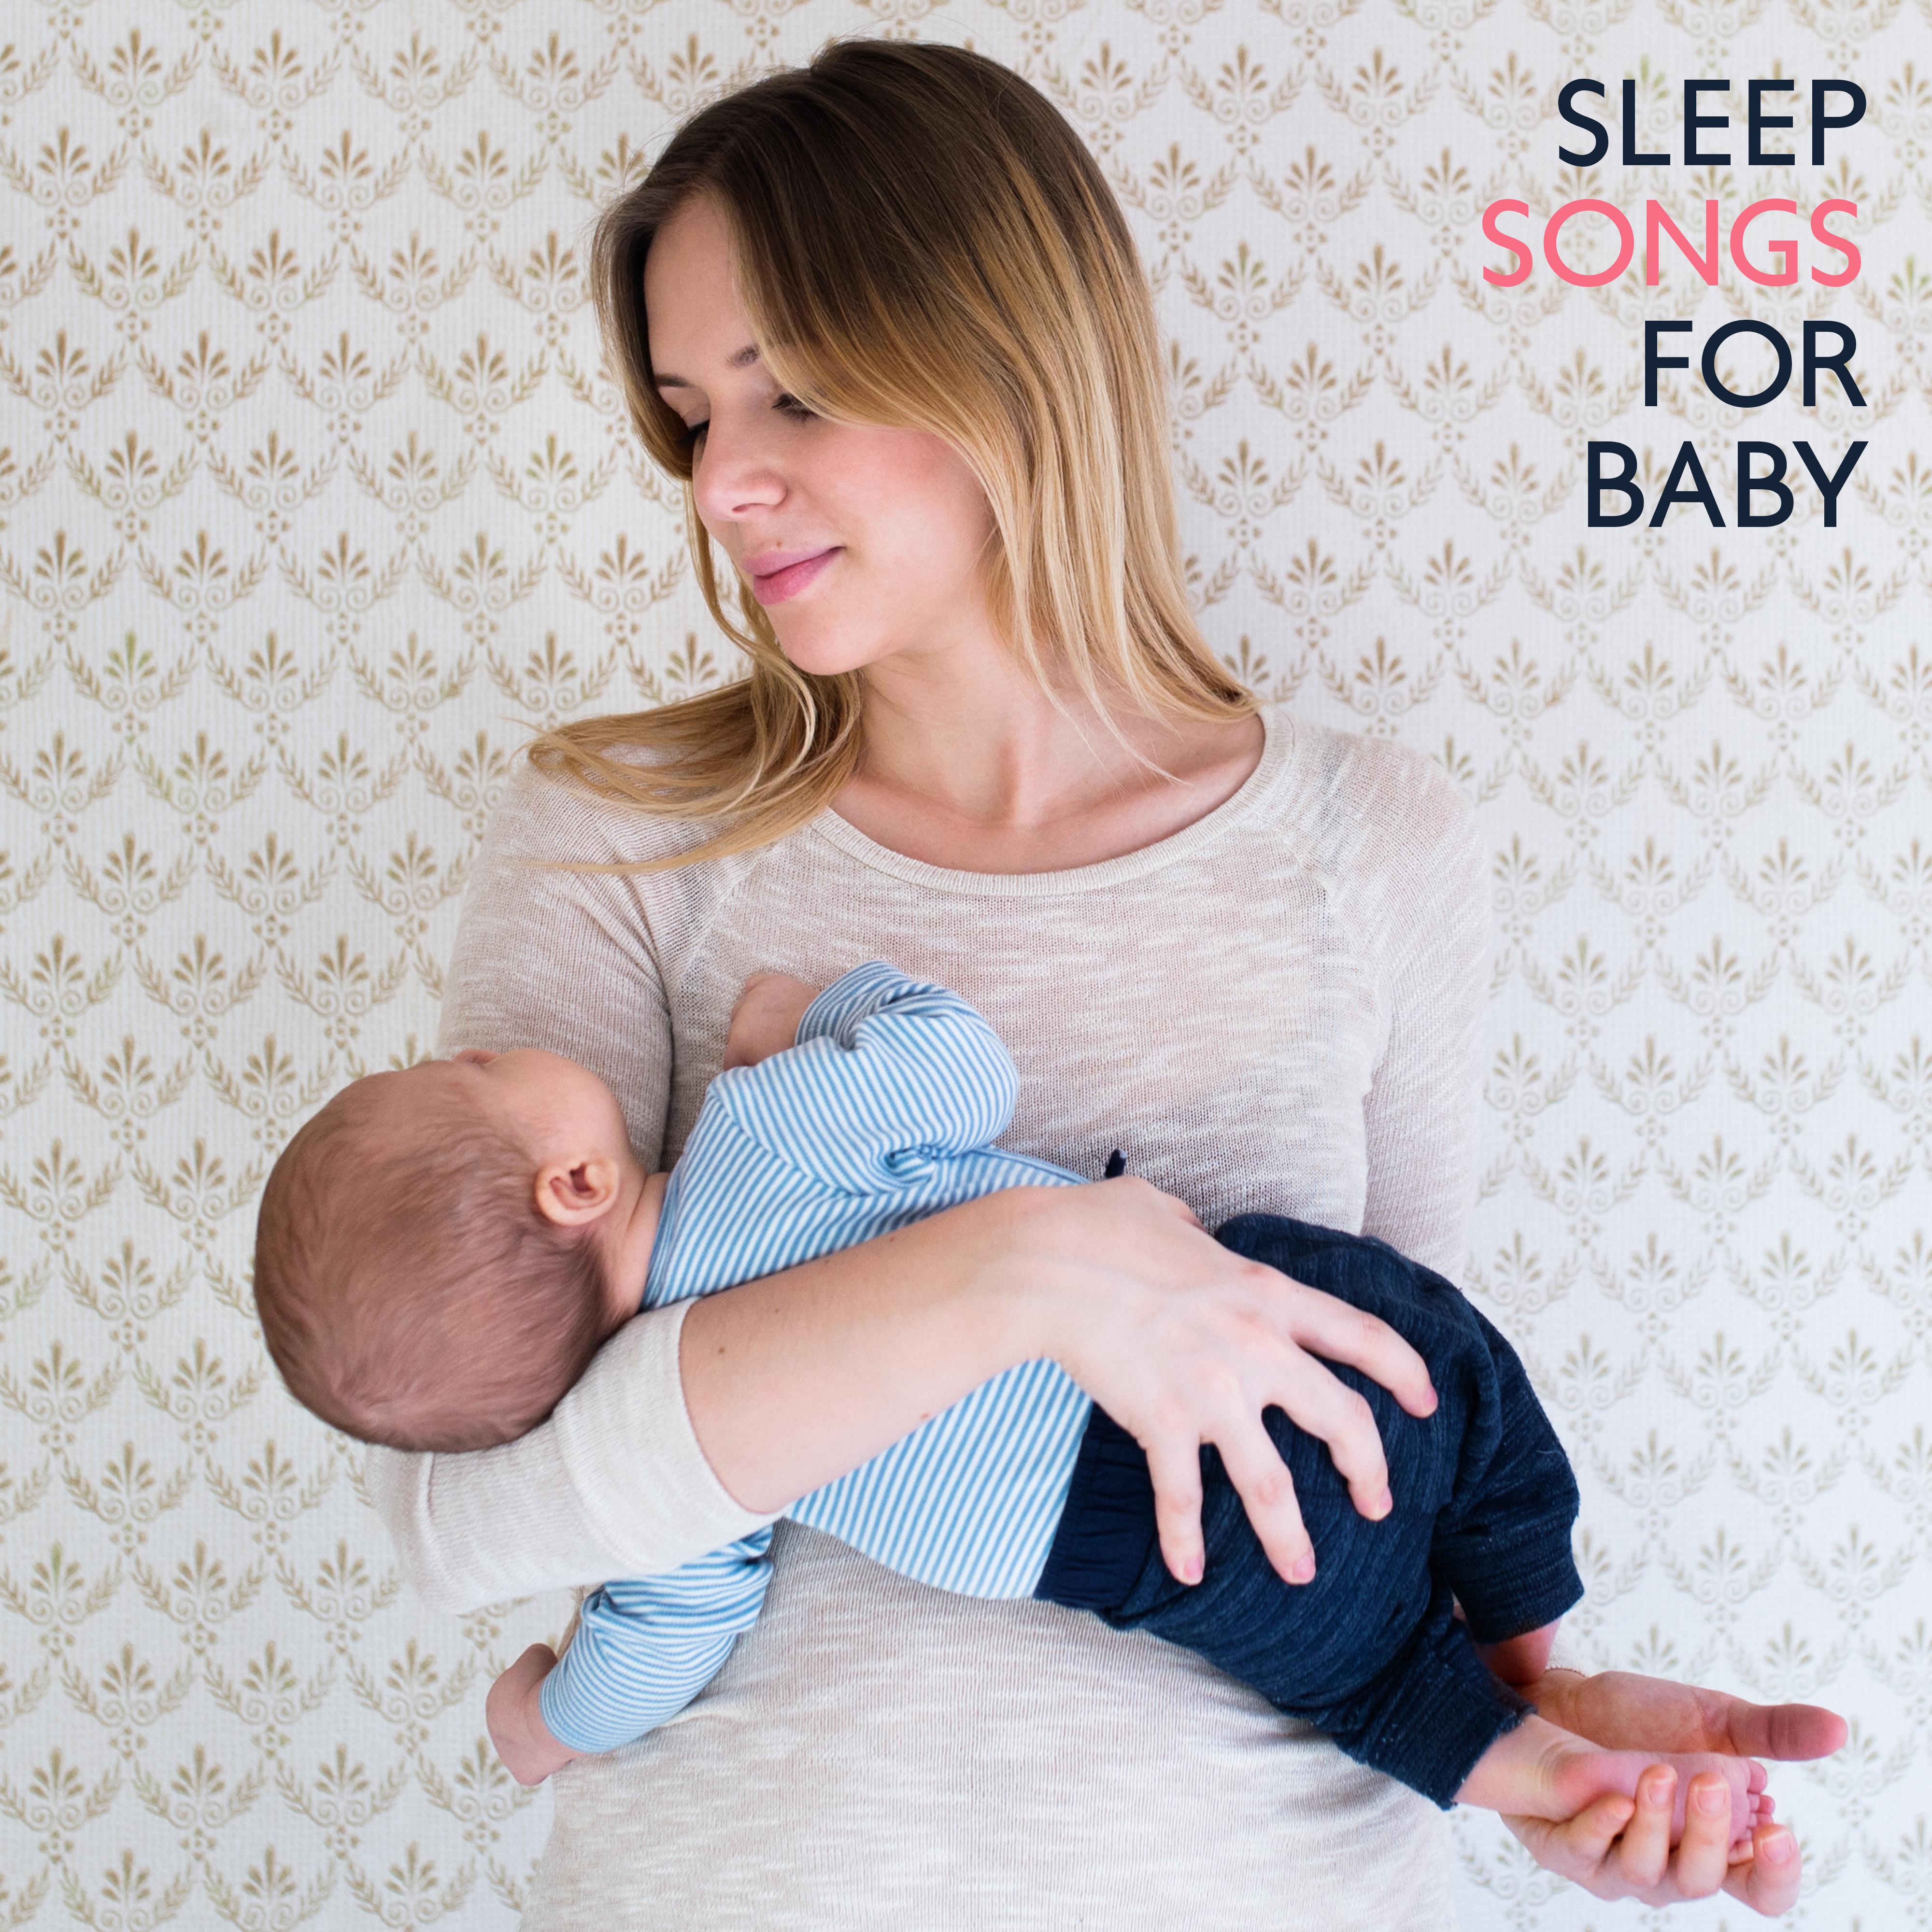 Sleep Songs for Baby  Soothing Nature Sounds at Night, Calming Lullabies, Peaceful Sleep, Singing Birds, Pure Therapy, Calm Down